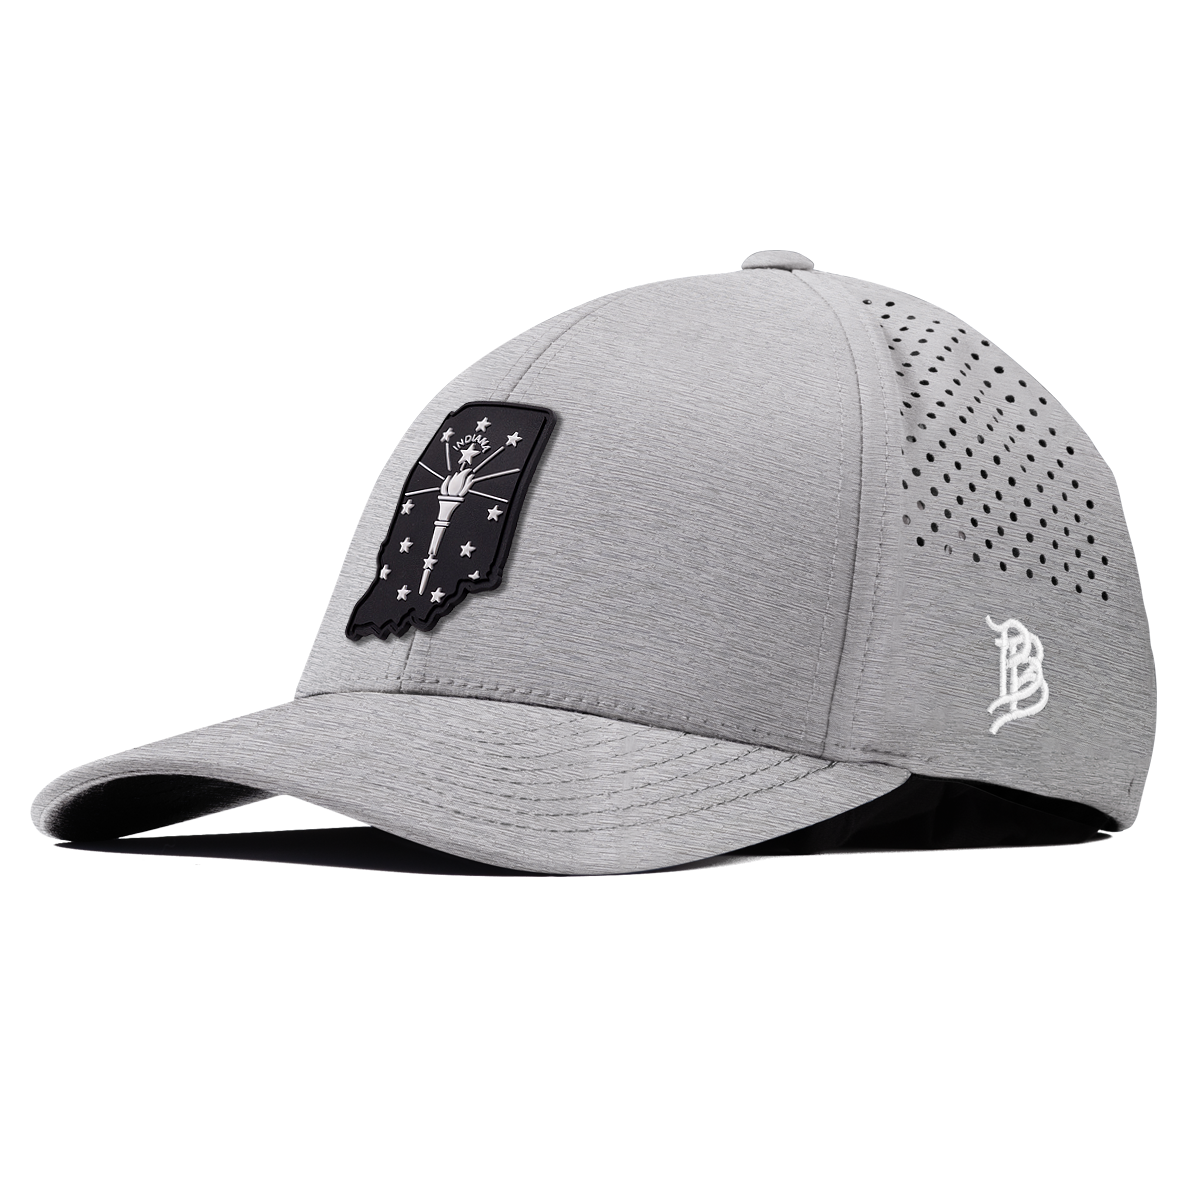 Indiana Vintage Curved Performance Heather Gray